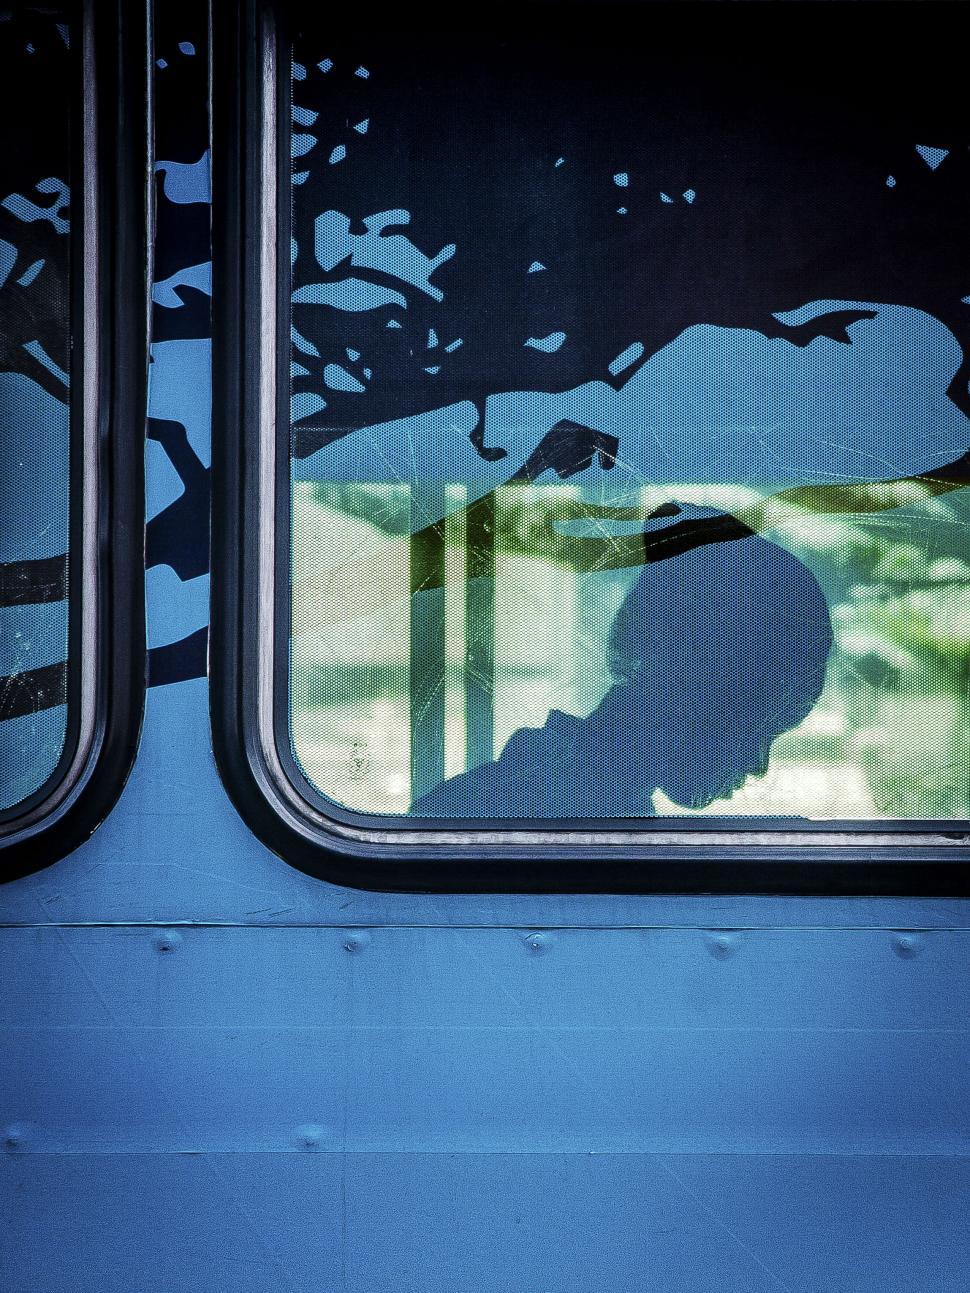 Free Image of Silhouette in Window of Blue Vehicle 